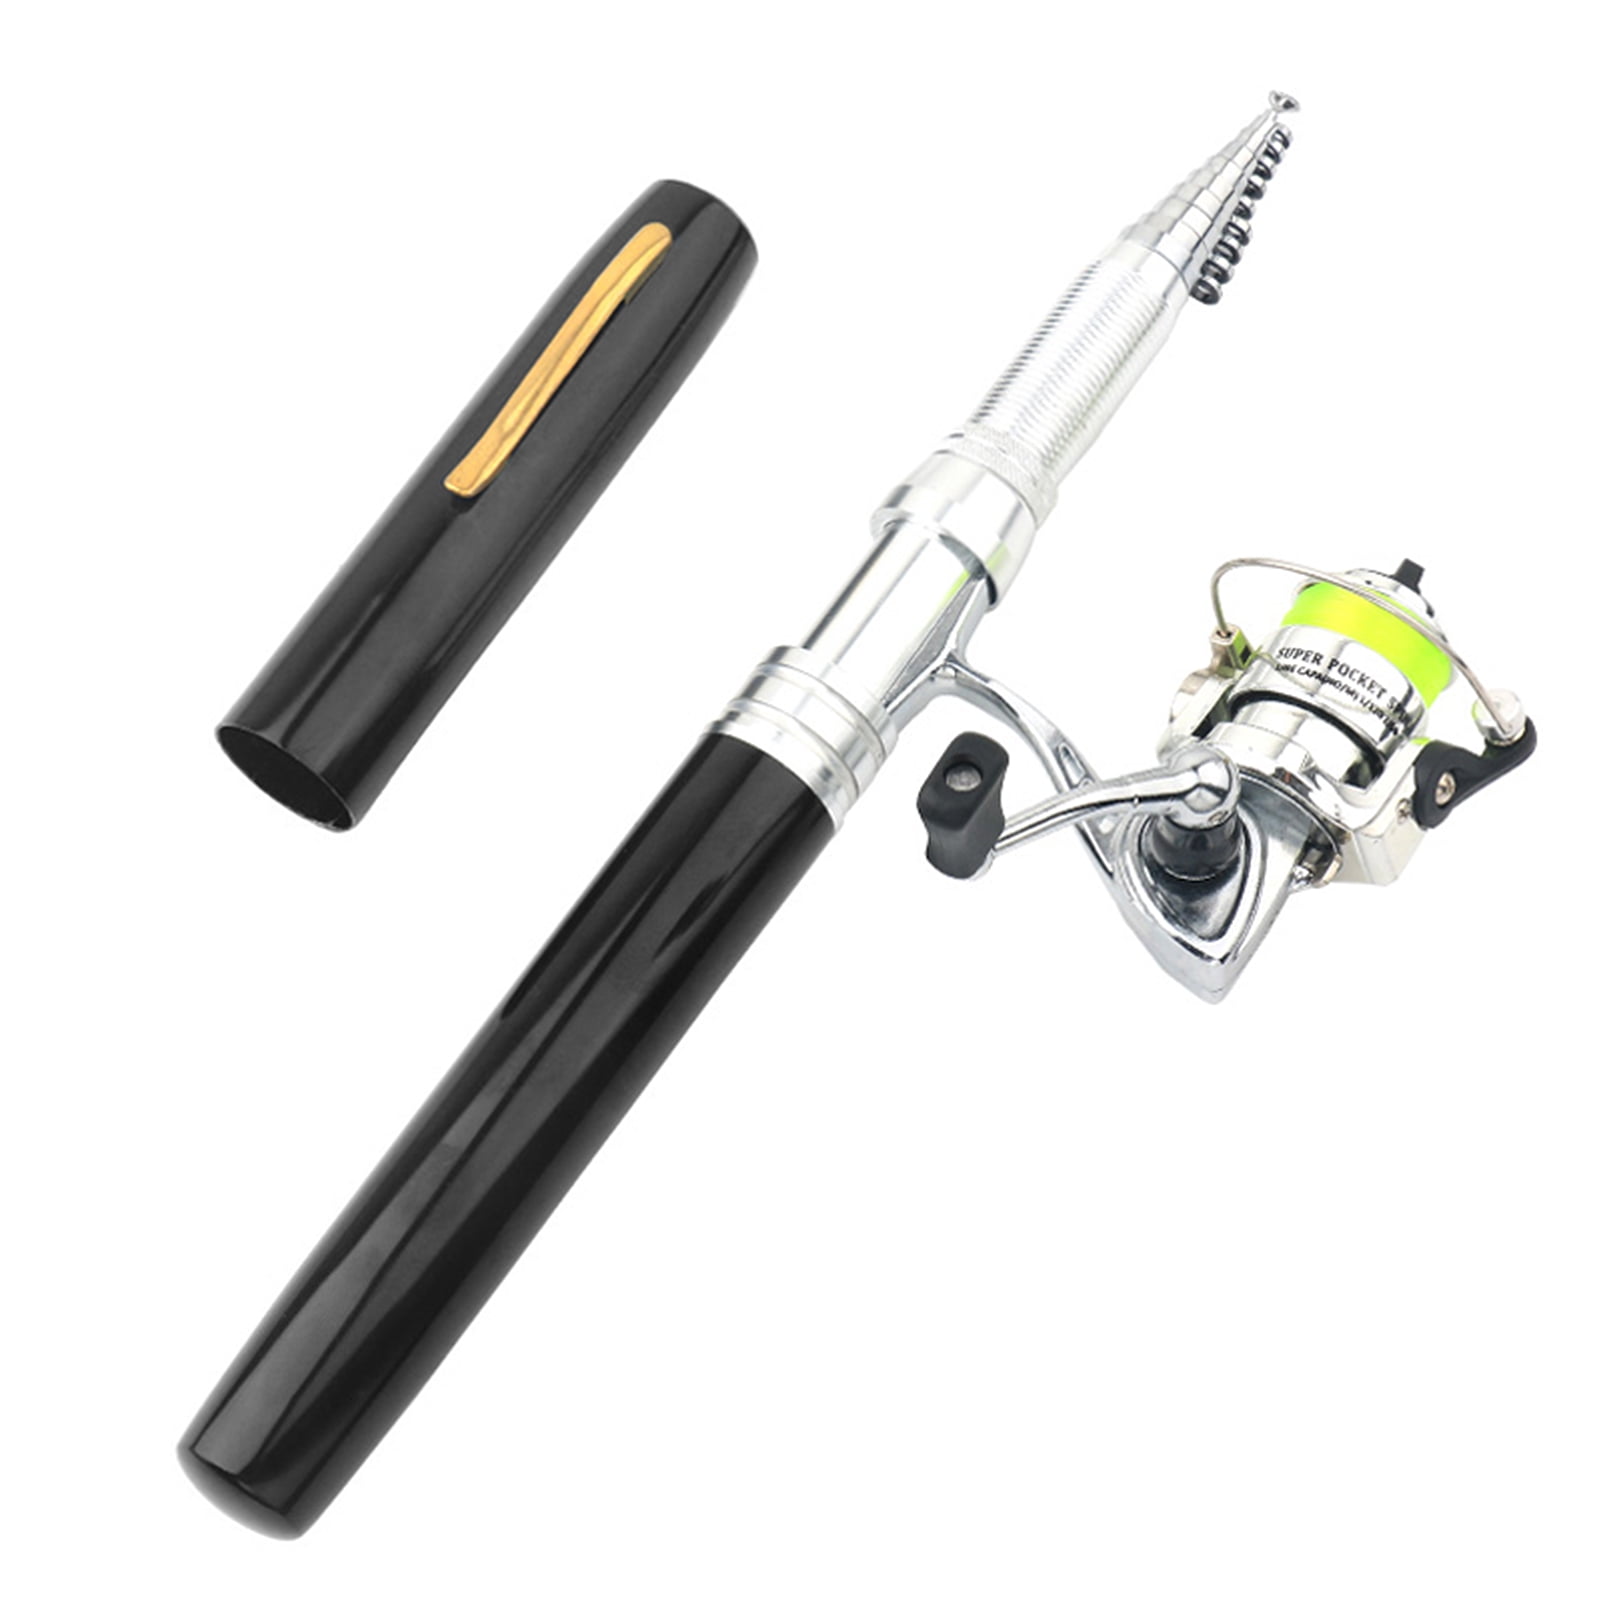 Eccomum Fishing Set 1.8m Retractable Rod, Spinning Reel, and Accessories -  Perfect Gift for Beginners and Pros